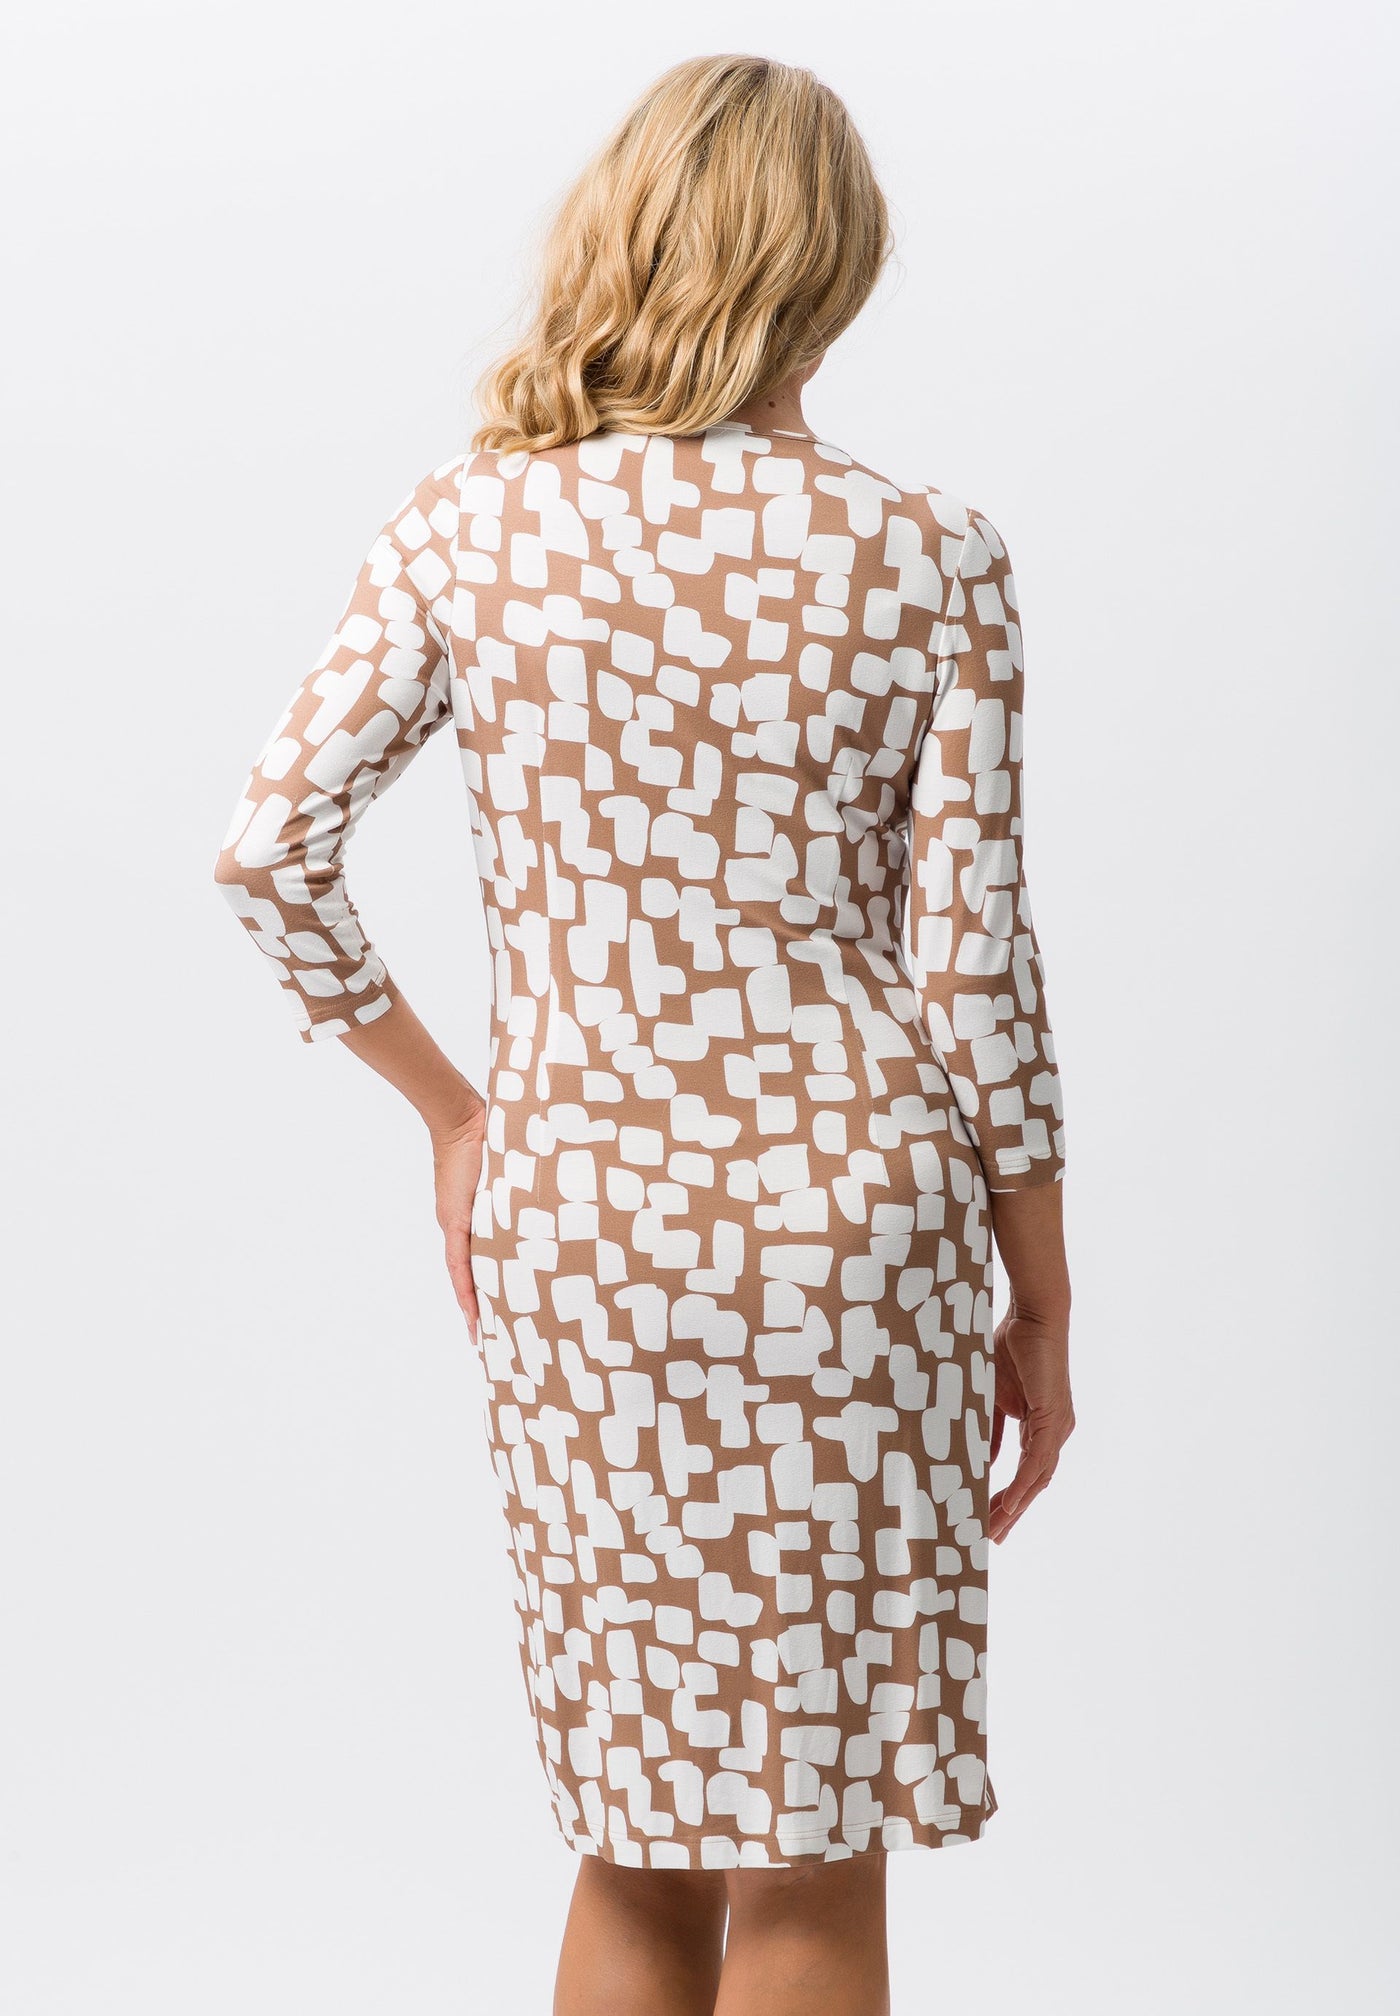 Brown Dress With Cream Design & Buckle Detailing